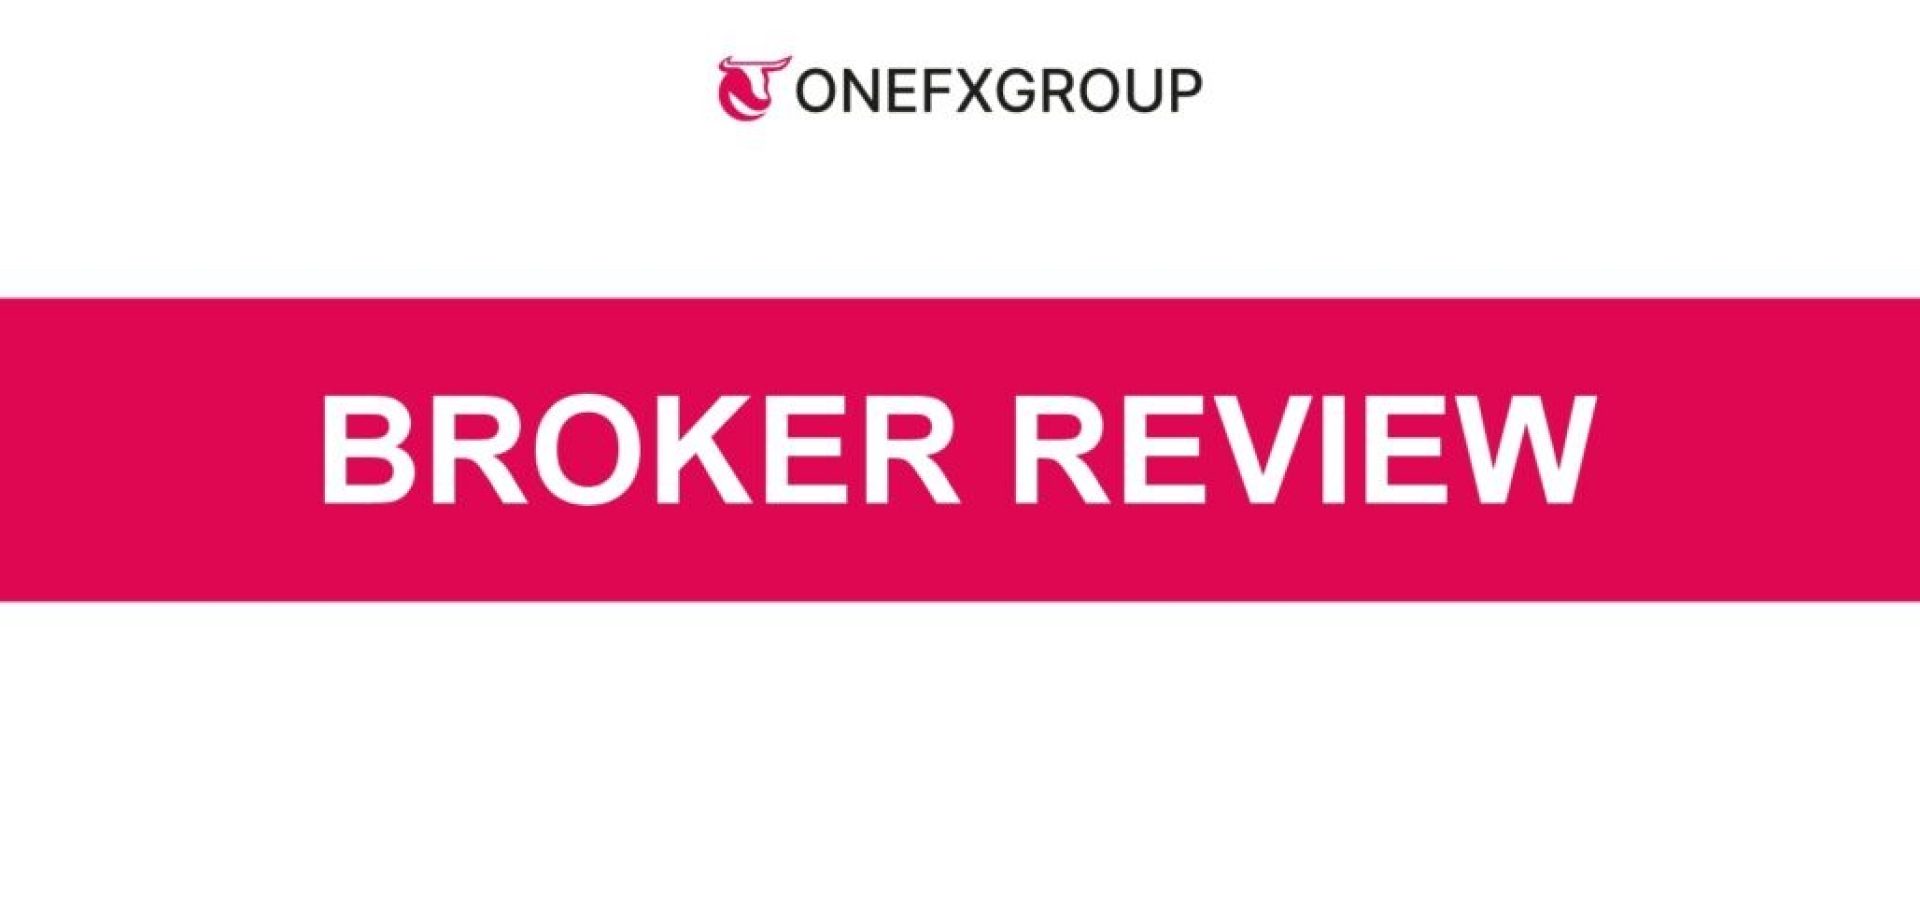 ONEFXGROUP Review